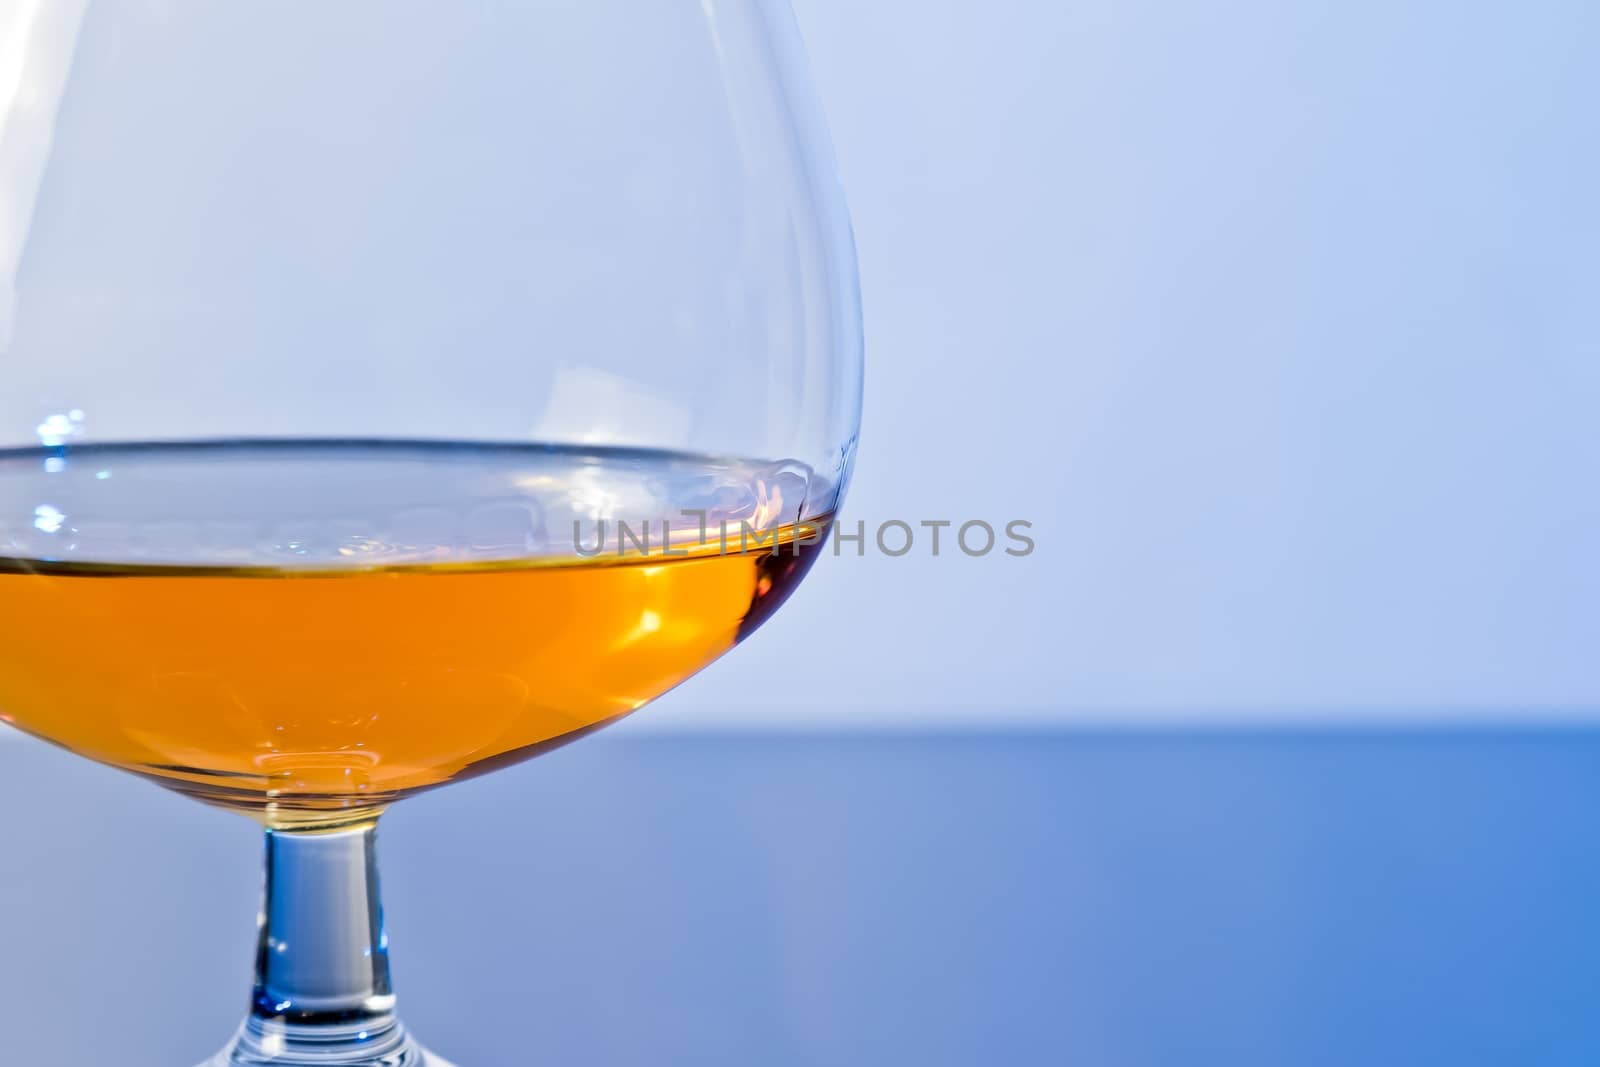 snifter of brandy in elegant typical cognac glass on blue light background, with reflection